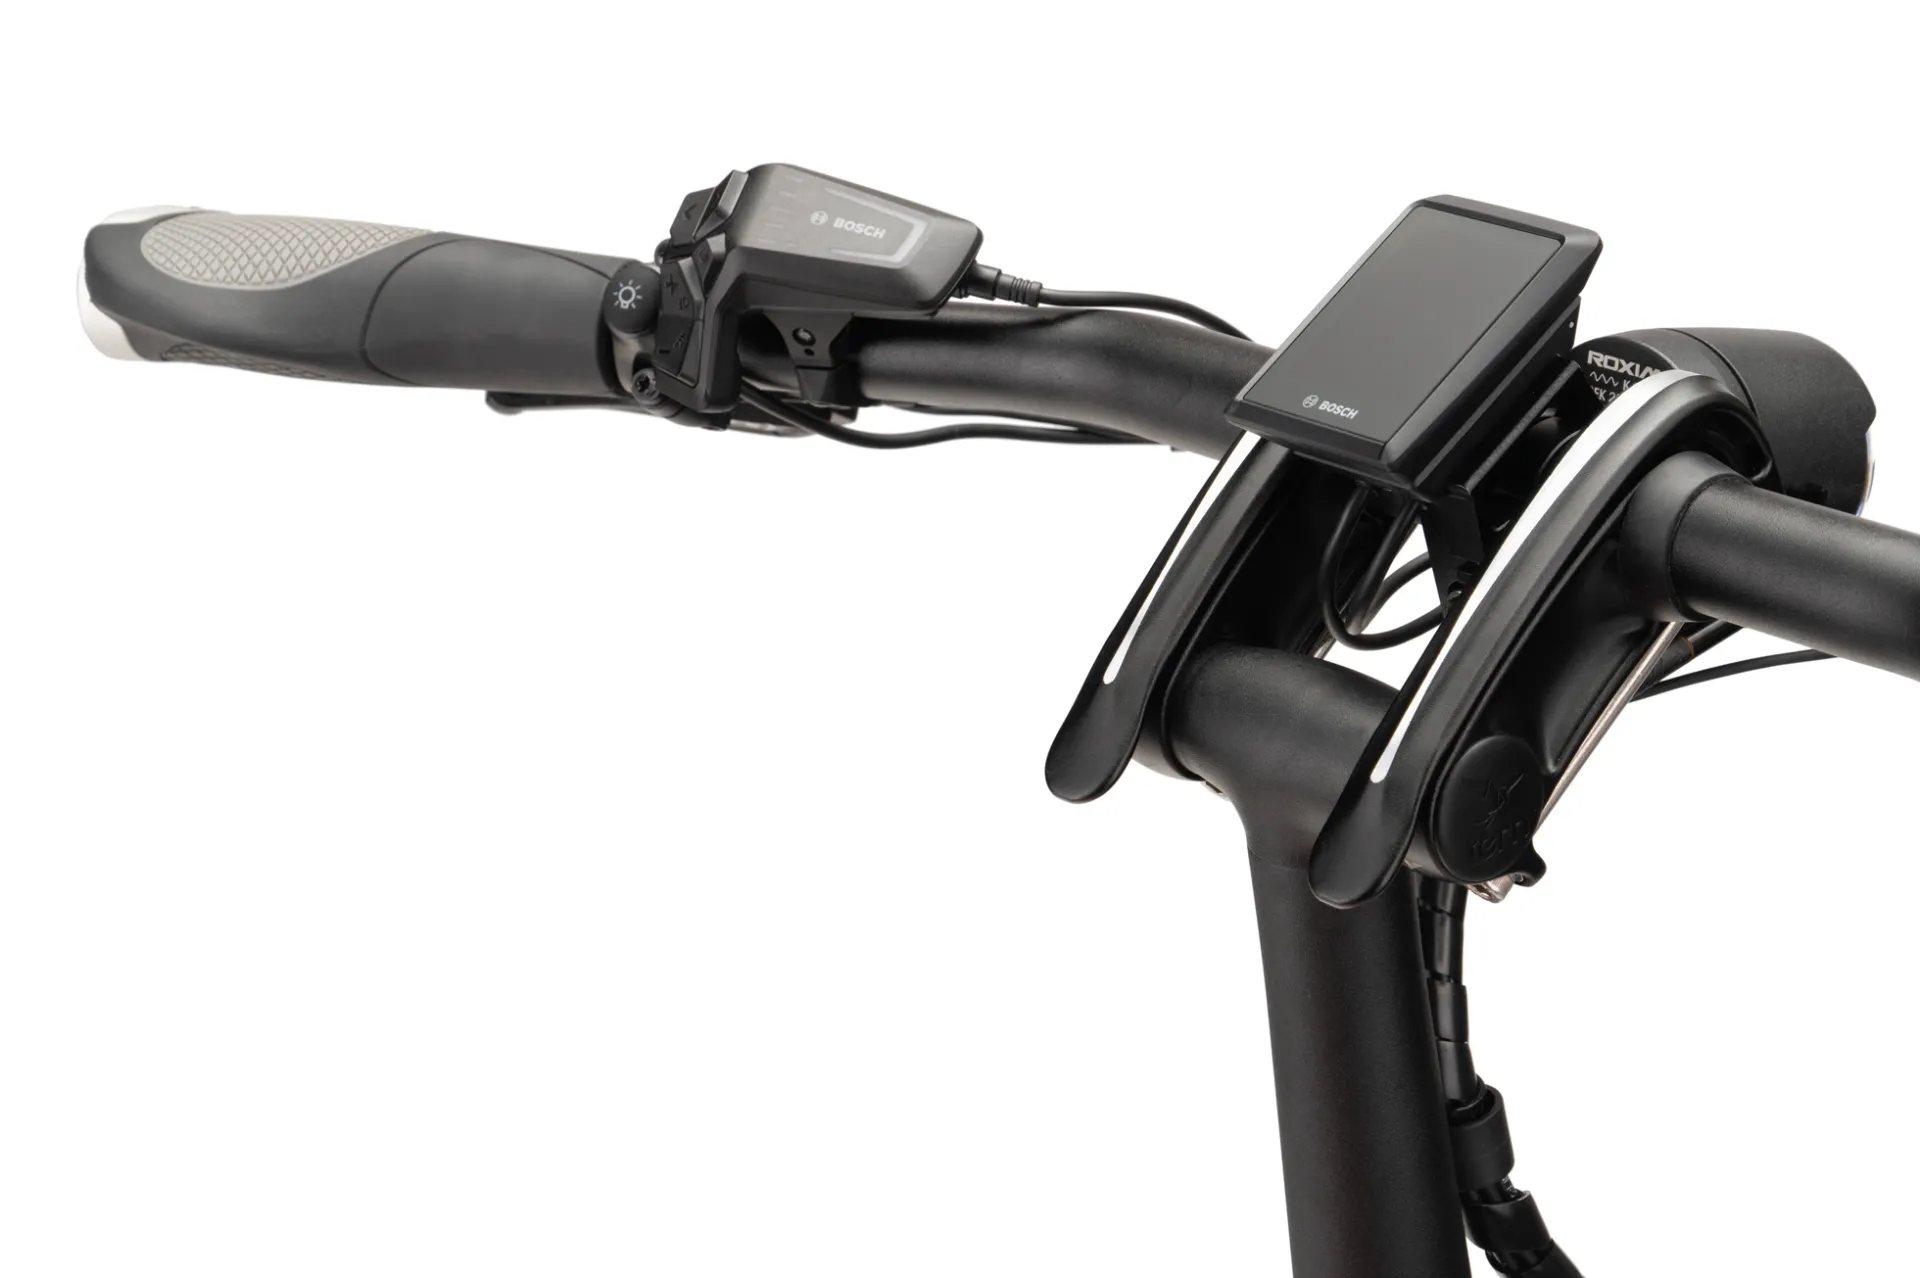 eBike Lock: Intelligent additional theft protection - Bosch eBike Systems